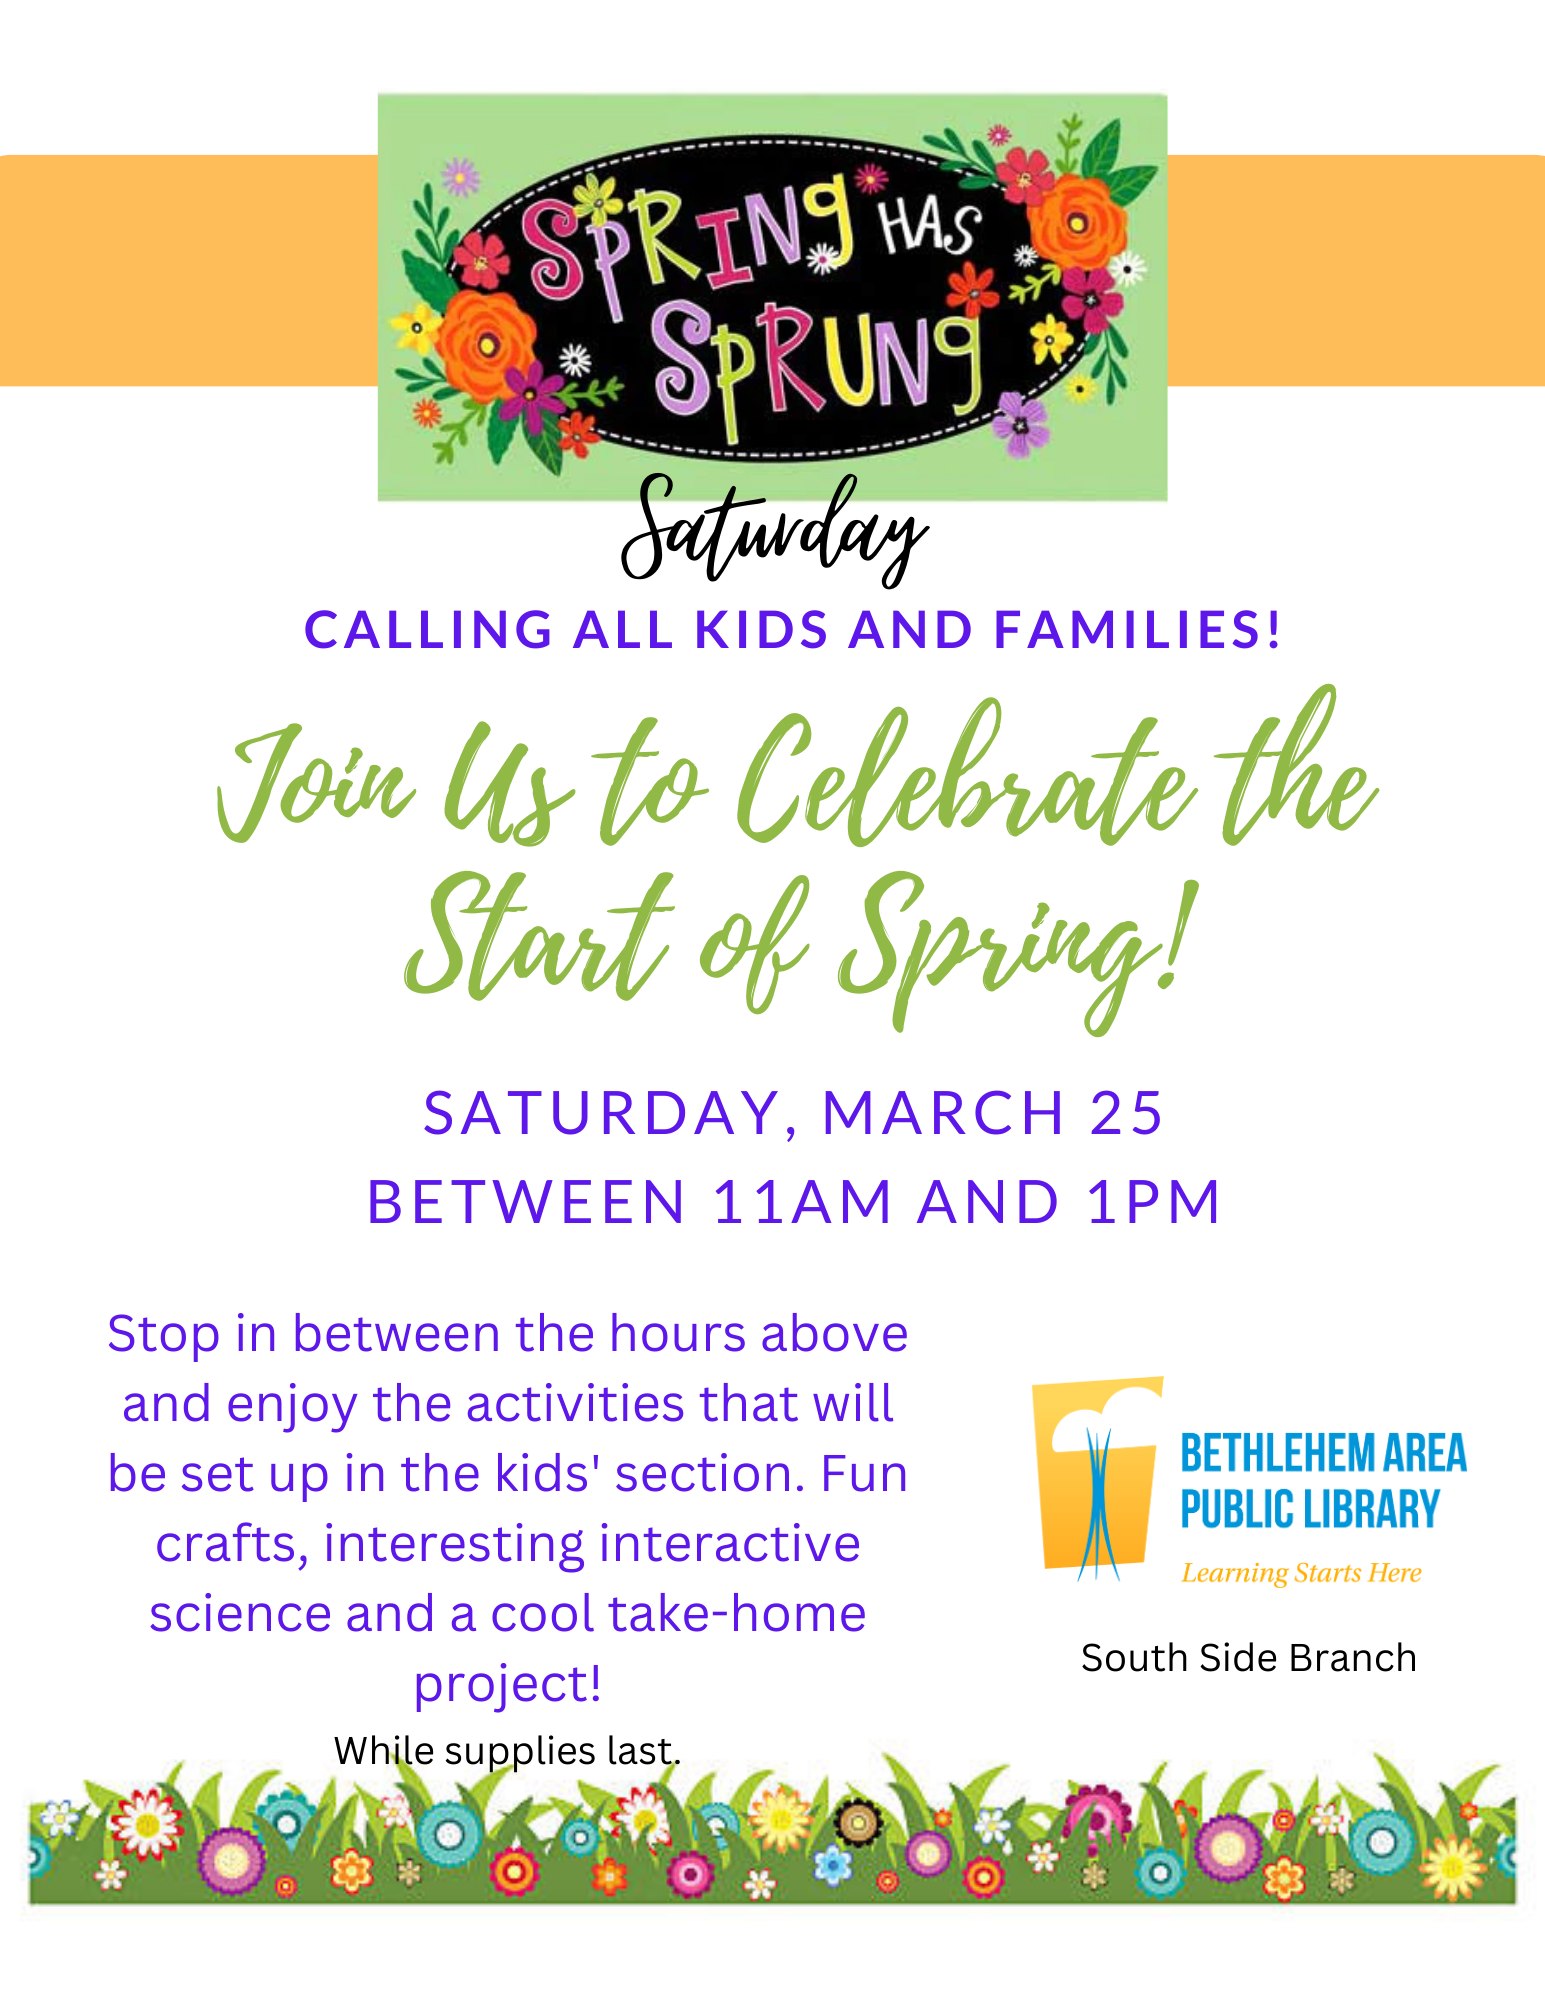 Join us for Spring fun!